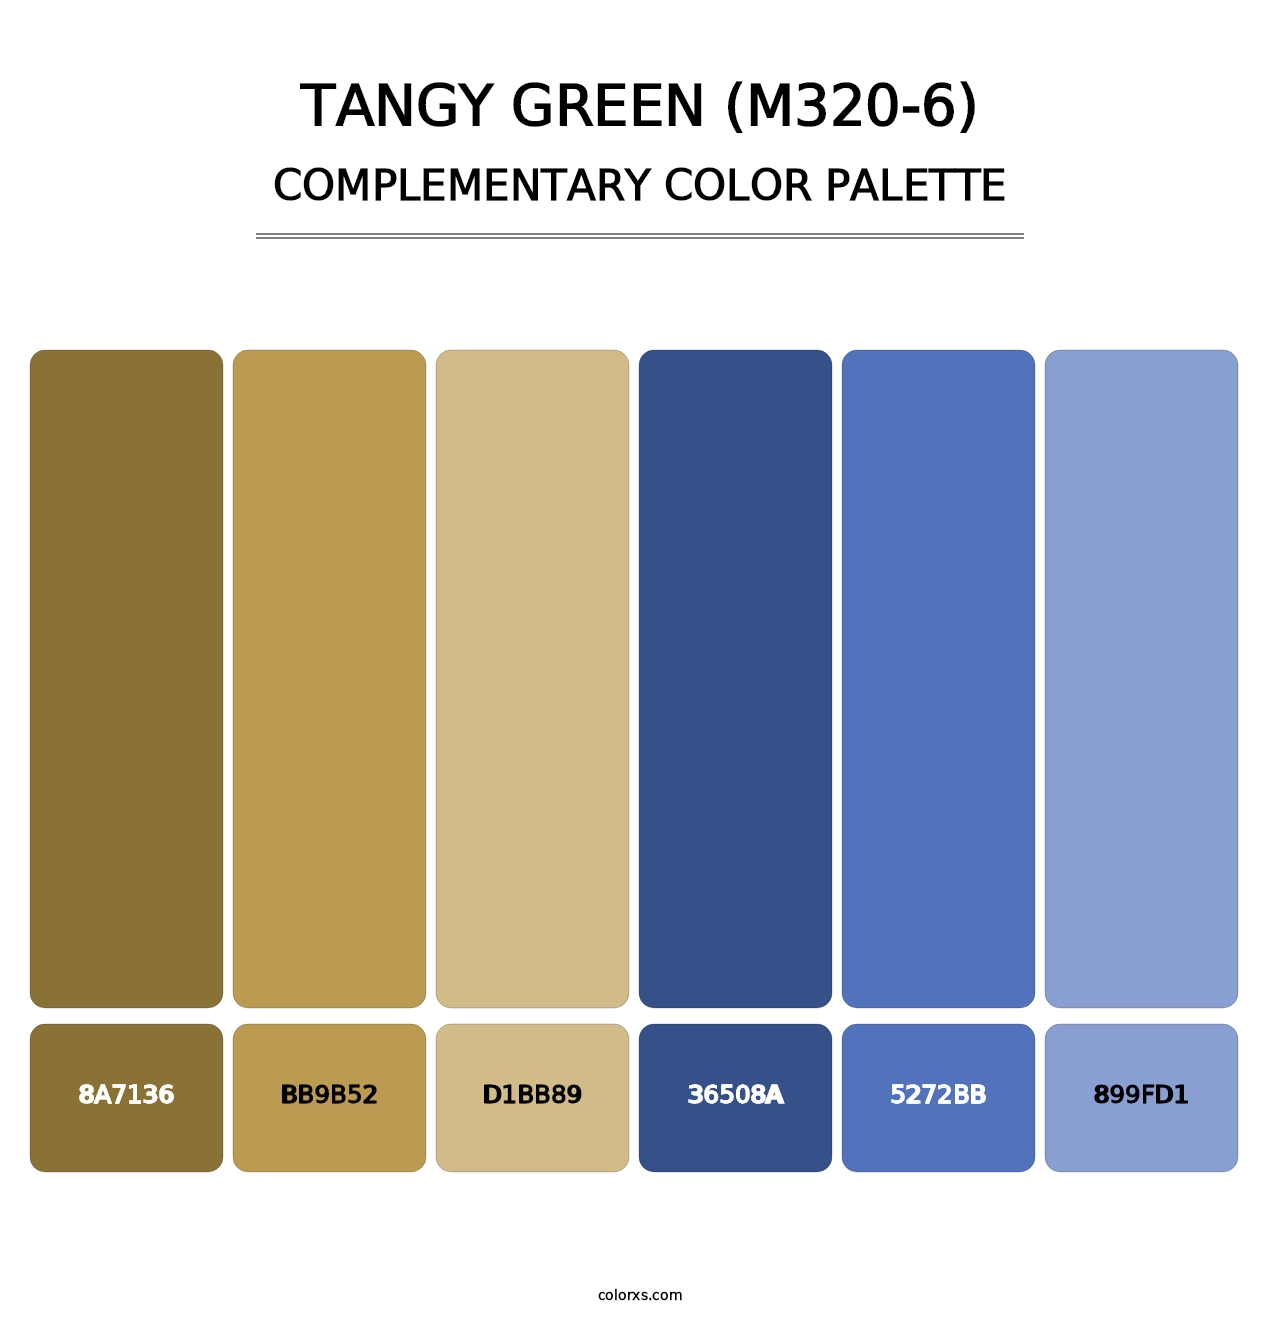 Tangy Green (M320-6) - Complementary Color Palette